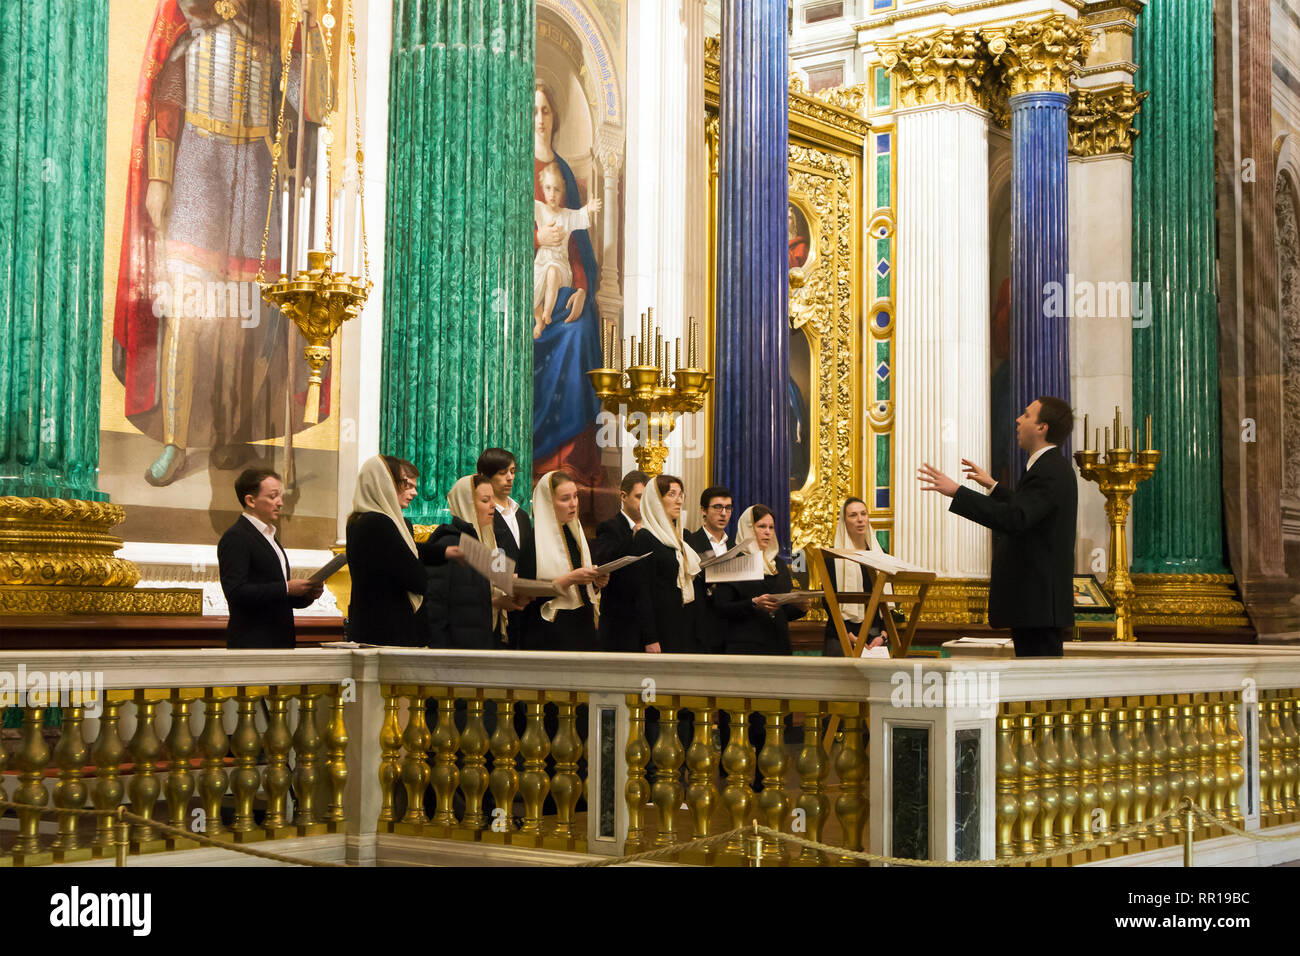 Church choir with conductor singing during the church service in Saint Isaac's orthodox cathedral Stock Photo